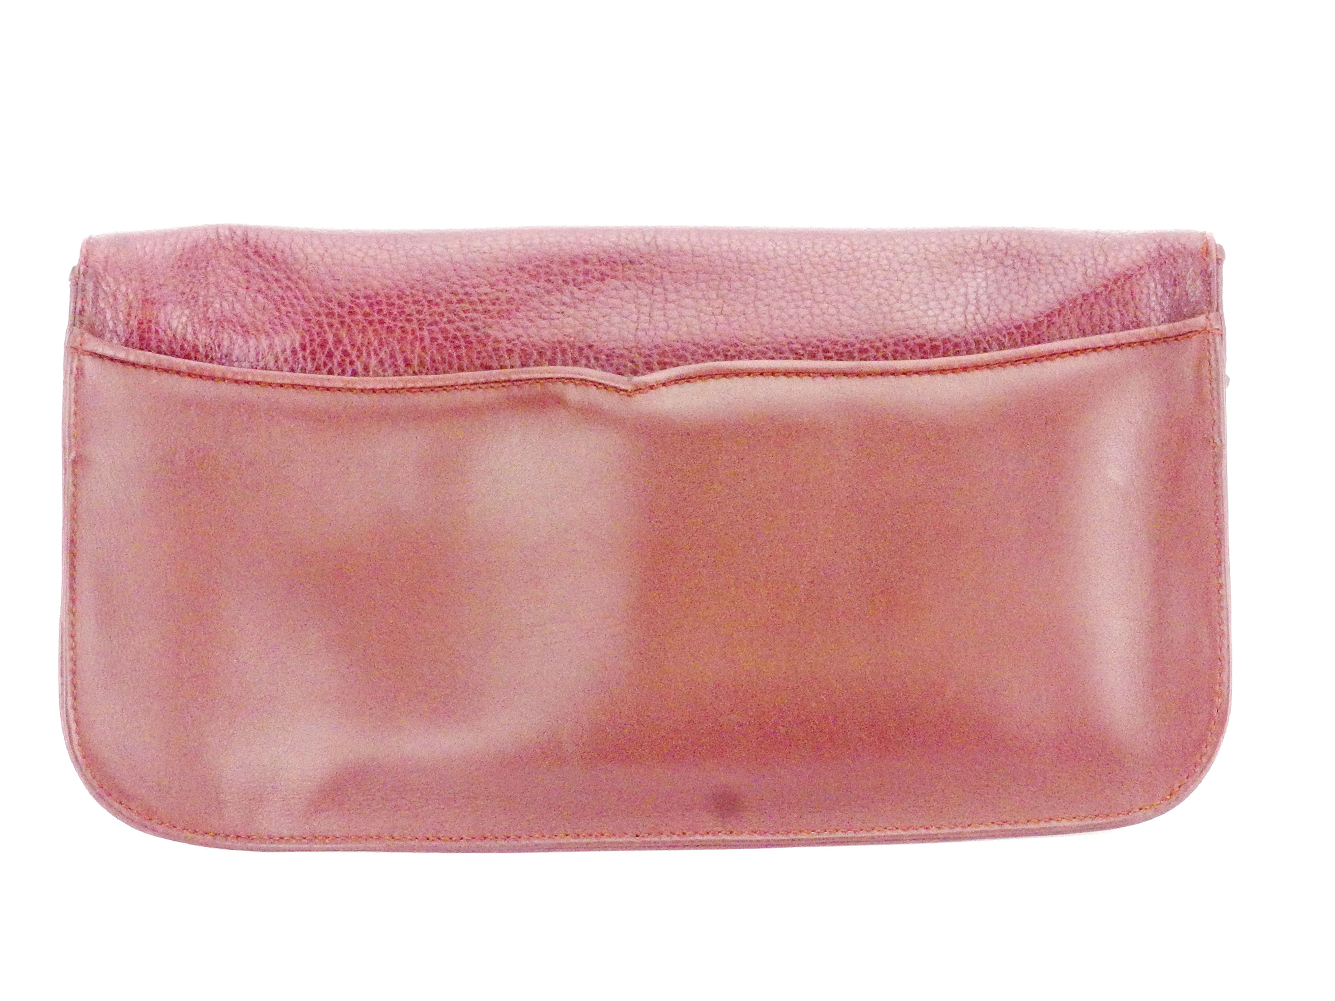 Cartier Clutch Bag Must Line Bordeaux Leather Auth used T9902 | eBay